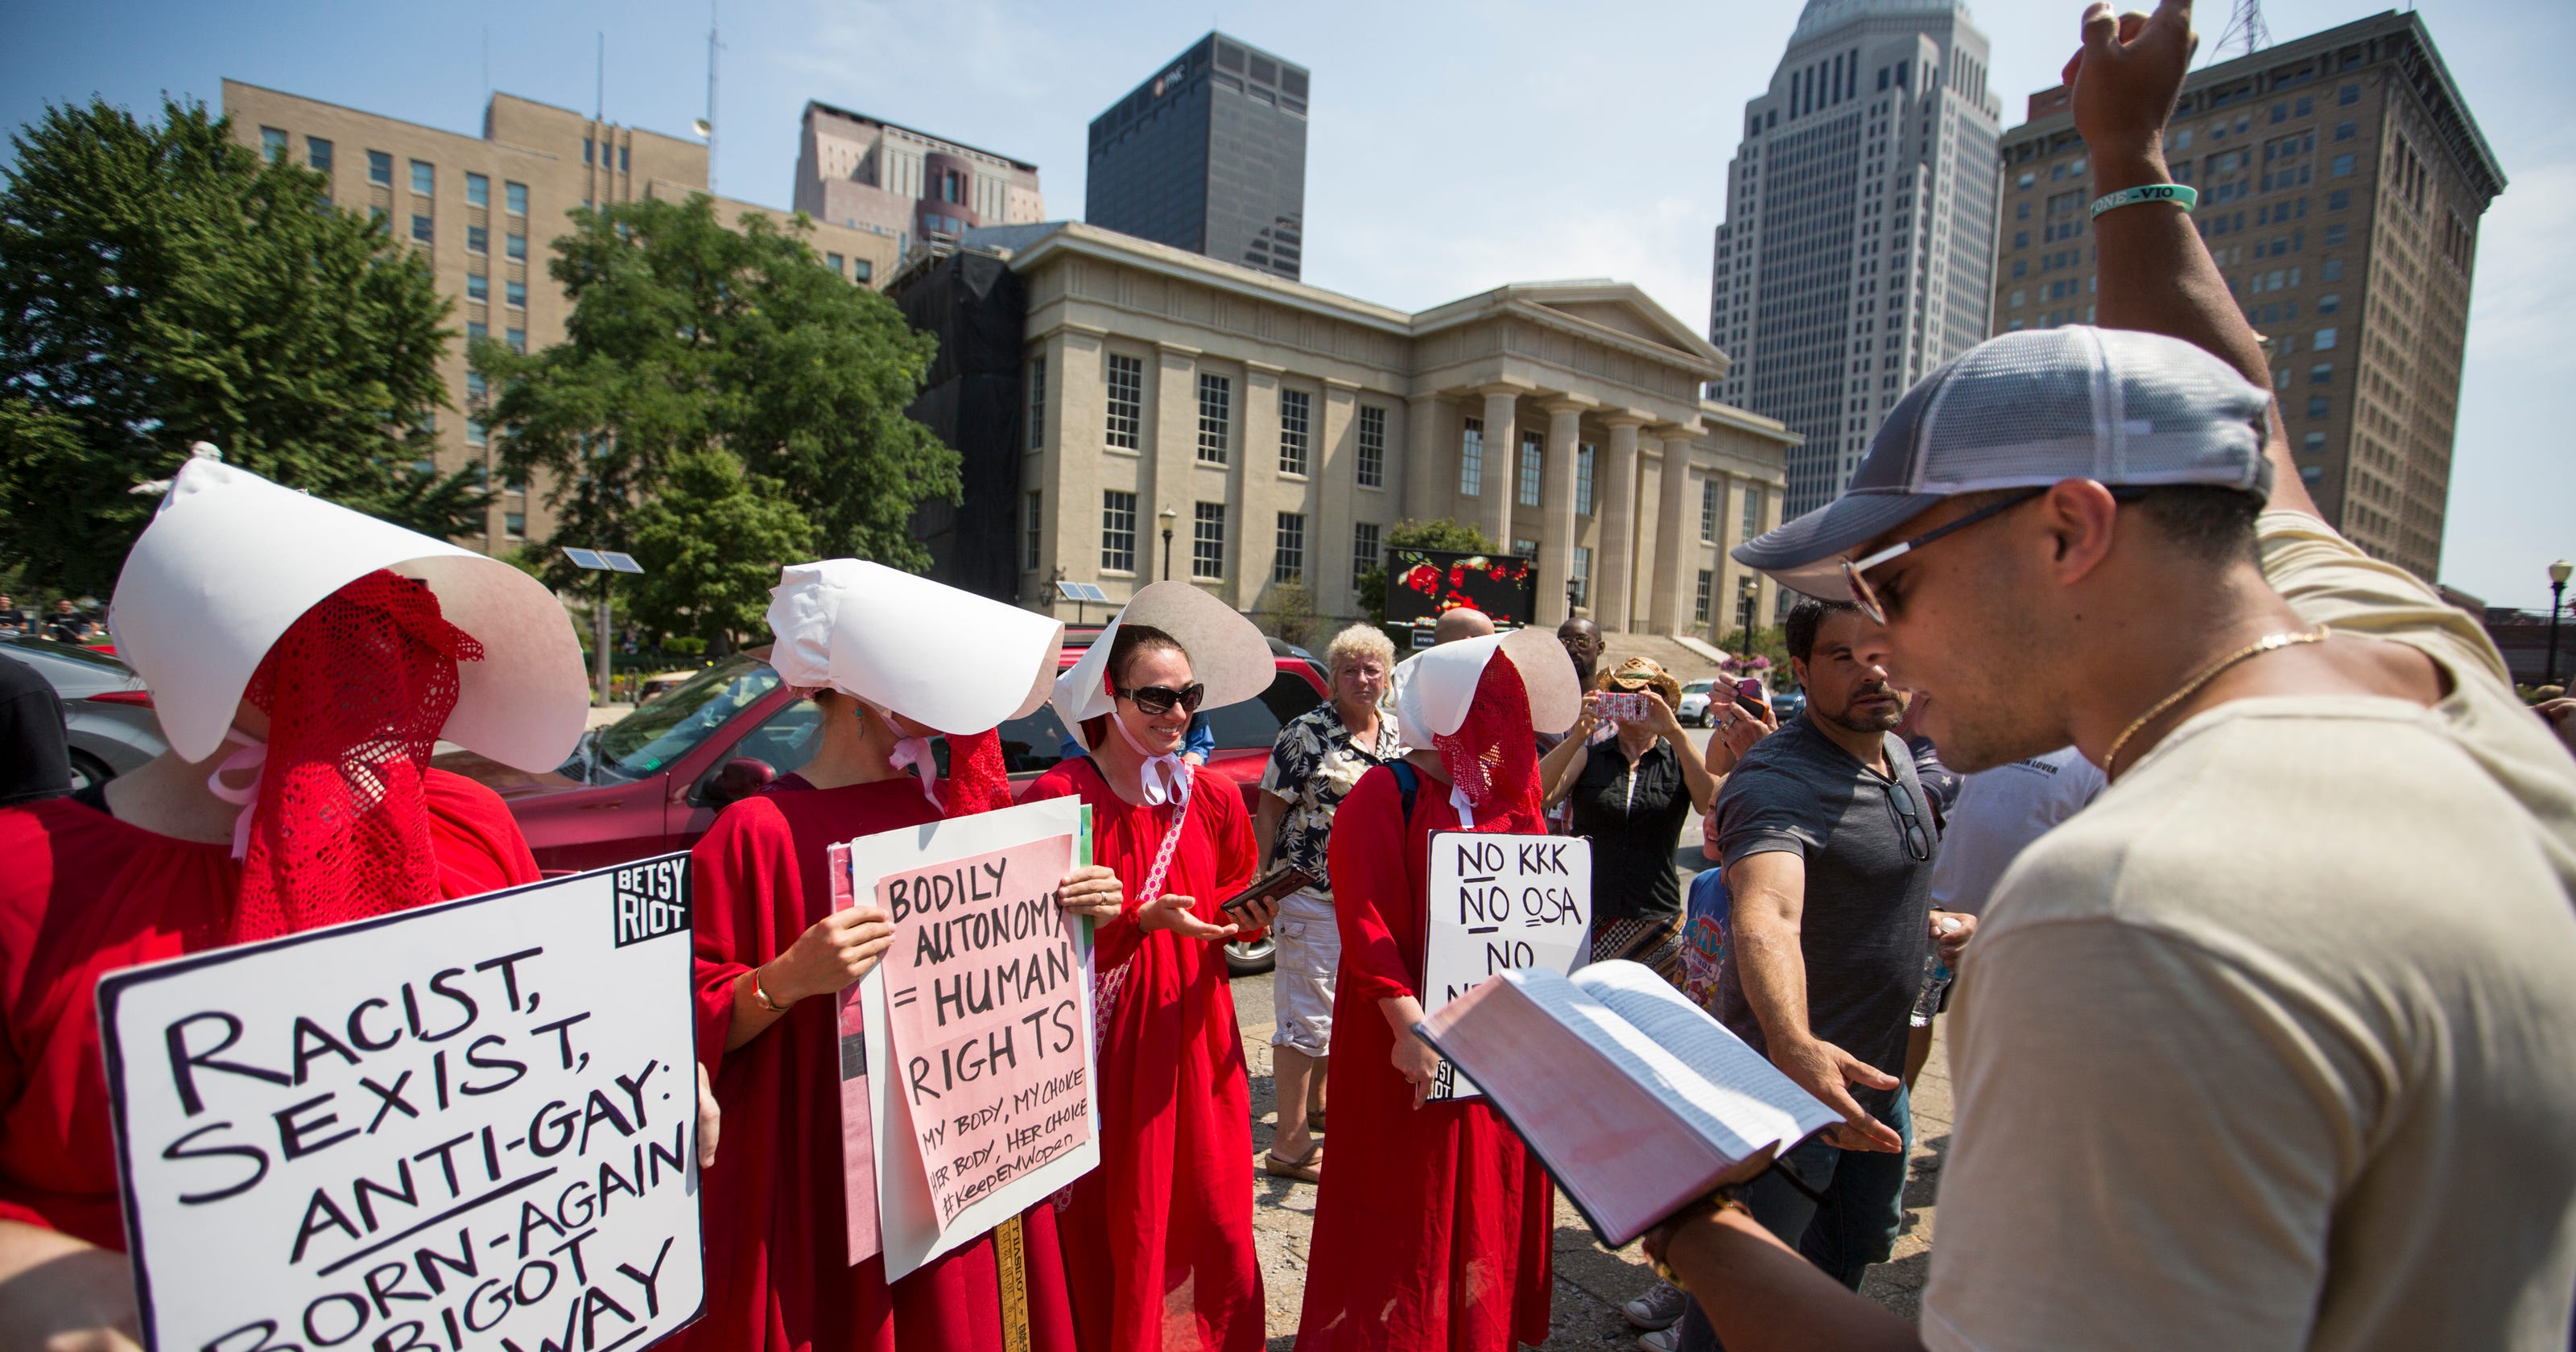 Louisville abortion protesters, opponents swap insults near City Hall